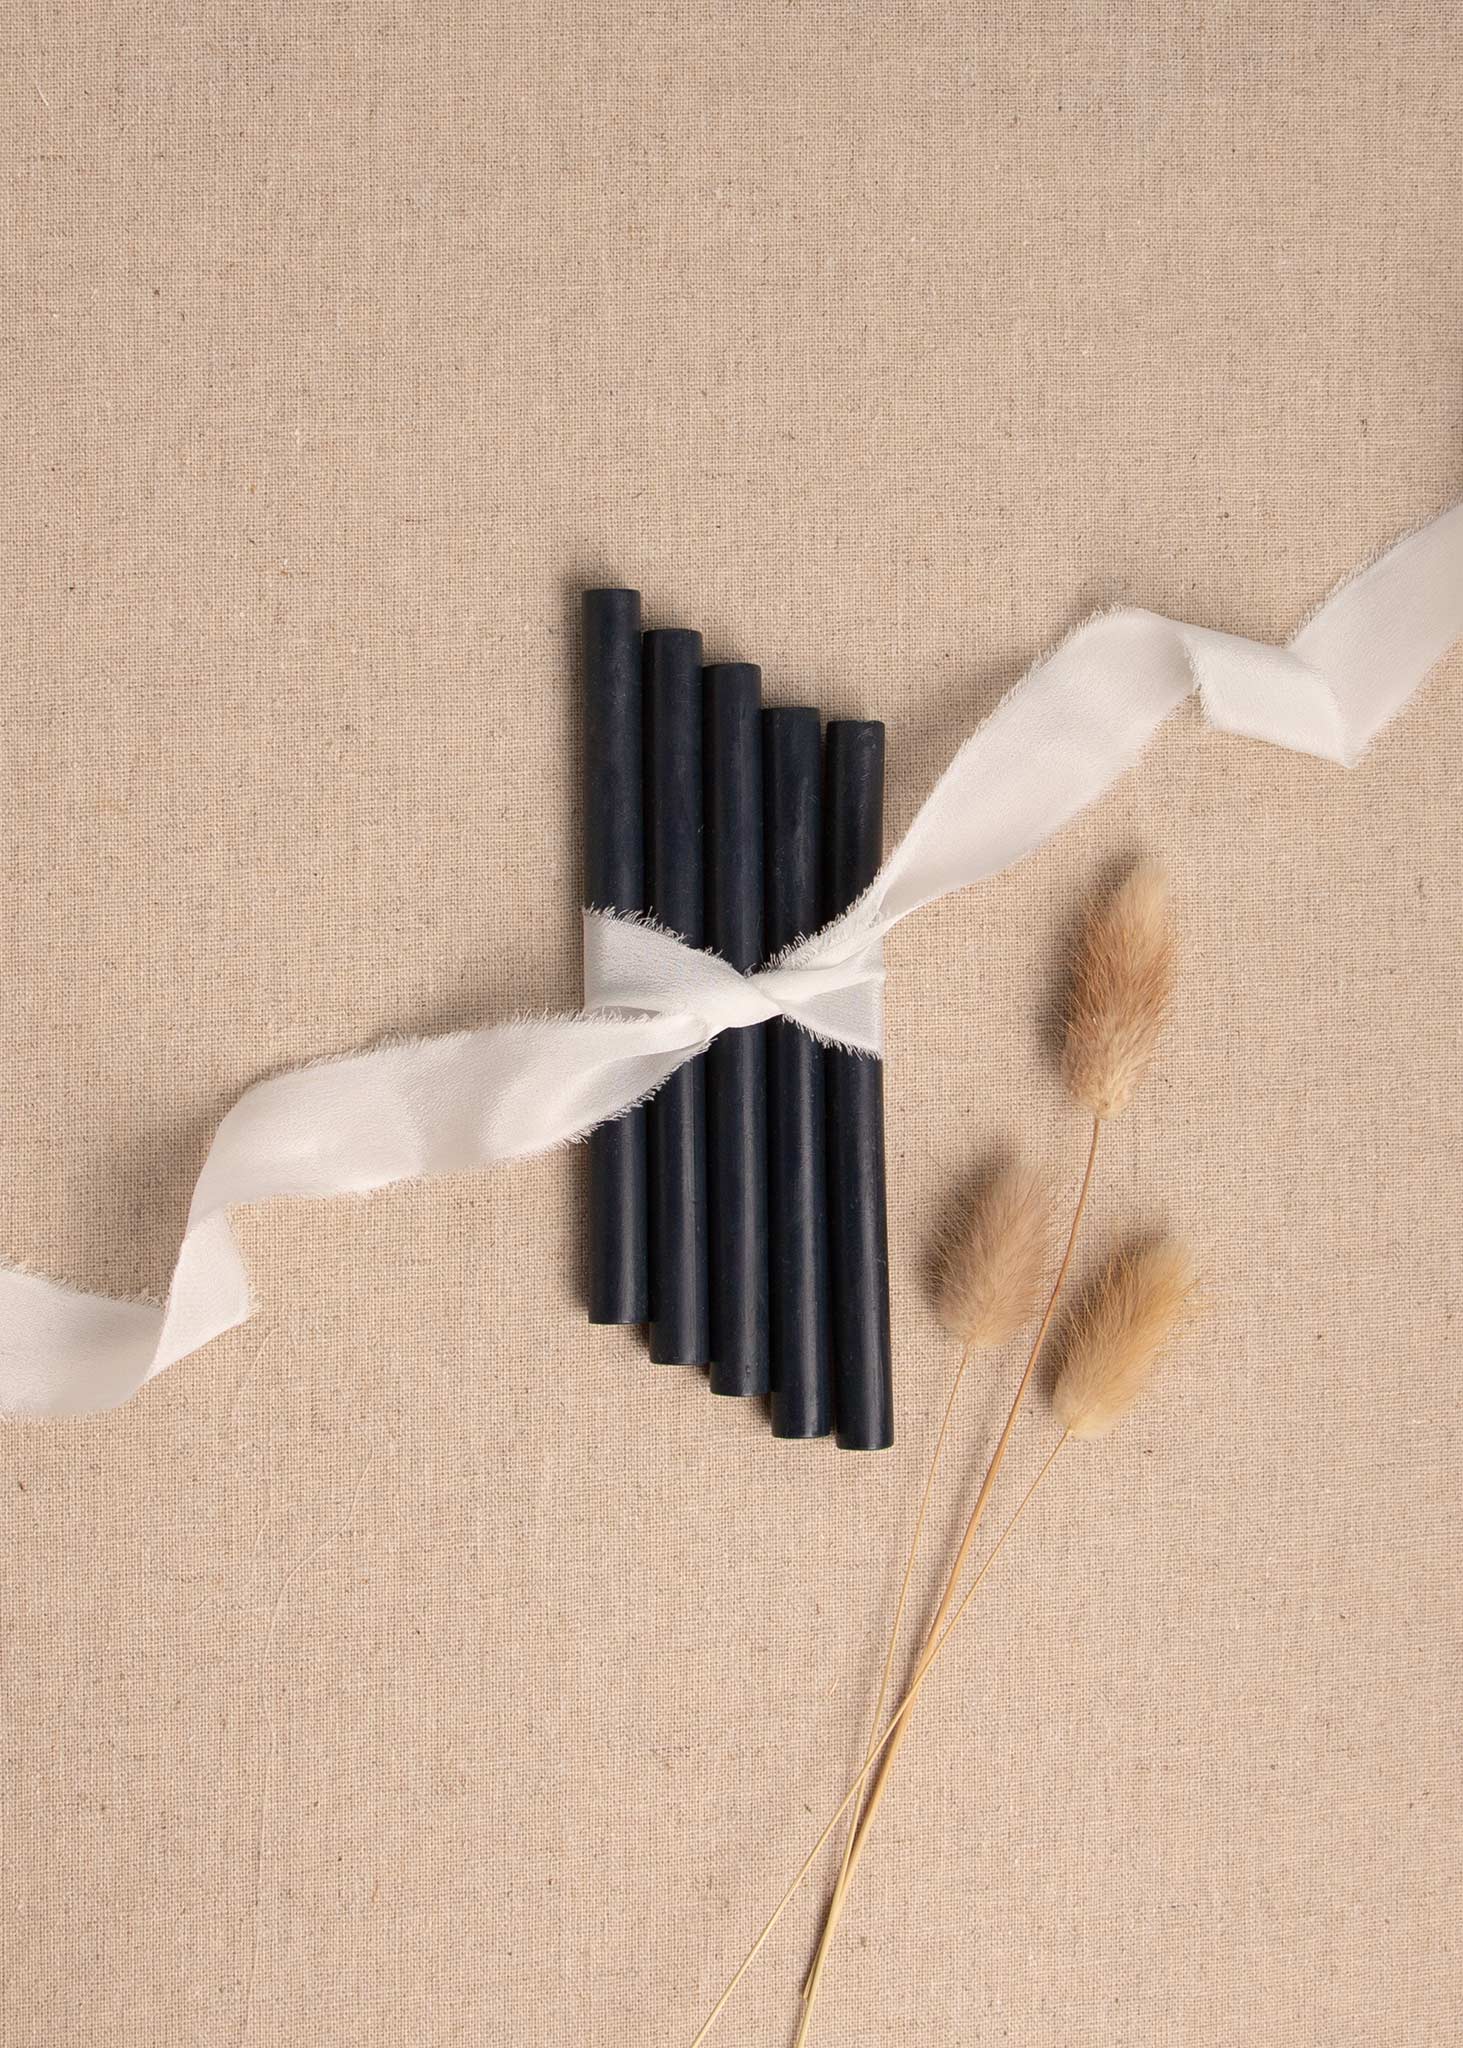 Dark blue wax sealing sticks on linen background with white silk ribbon and dried flowers